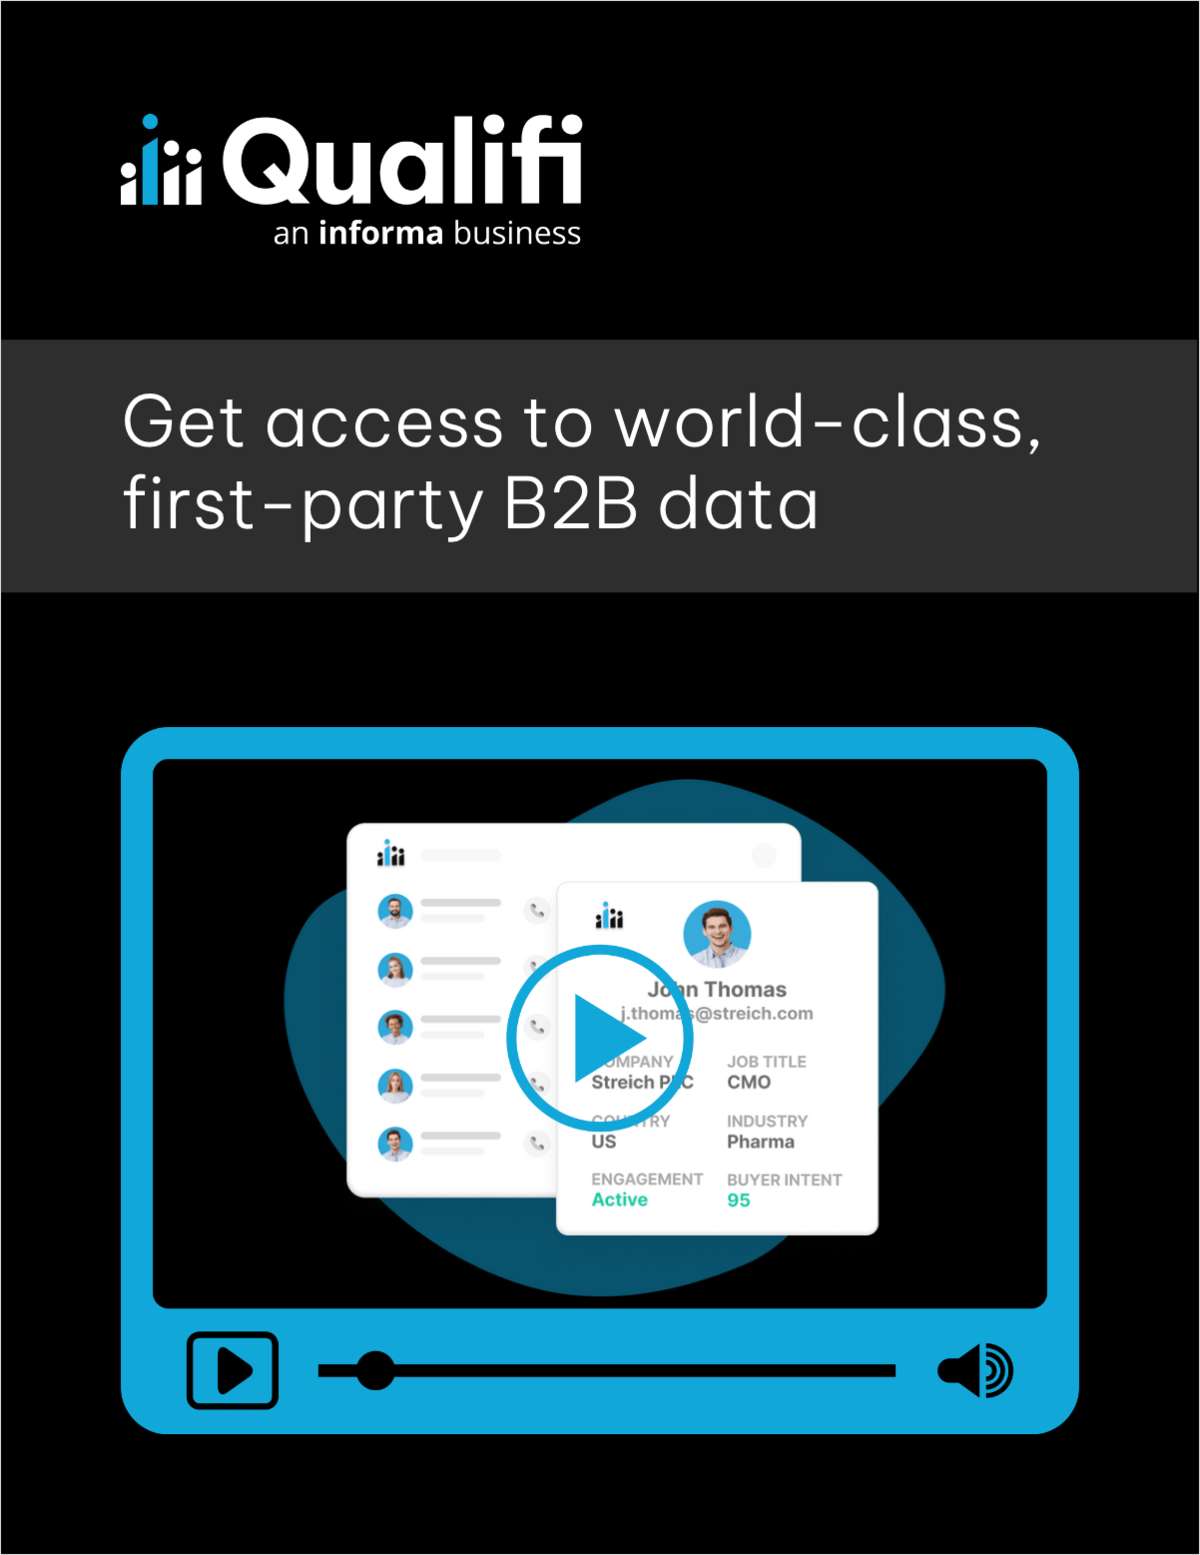 Get access to world-class, first-party B2B data